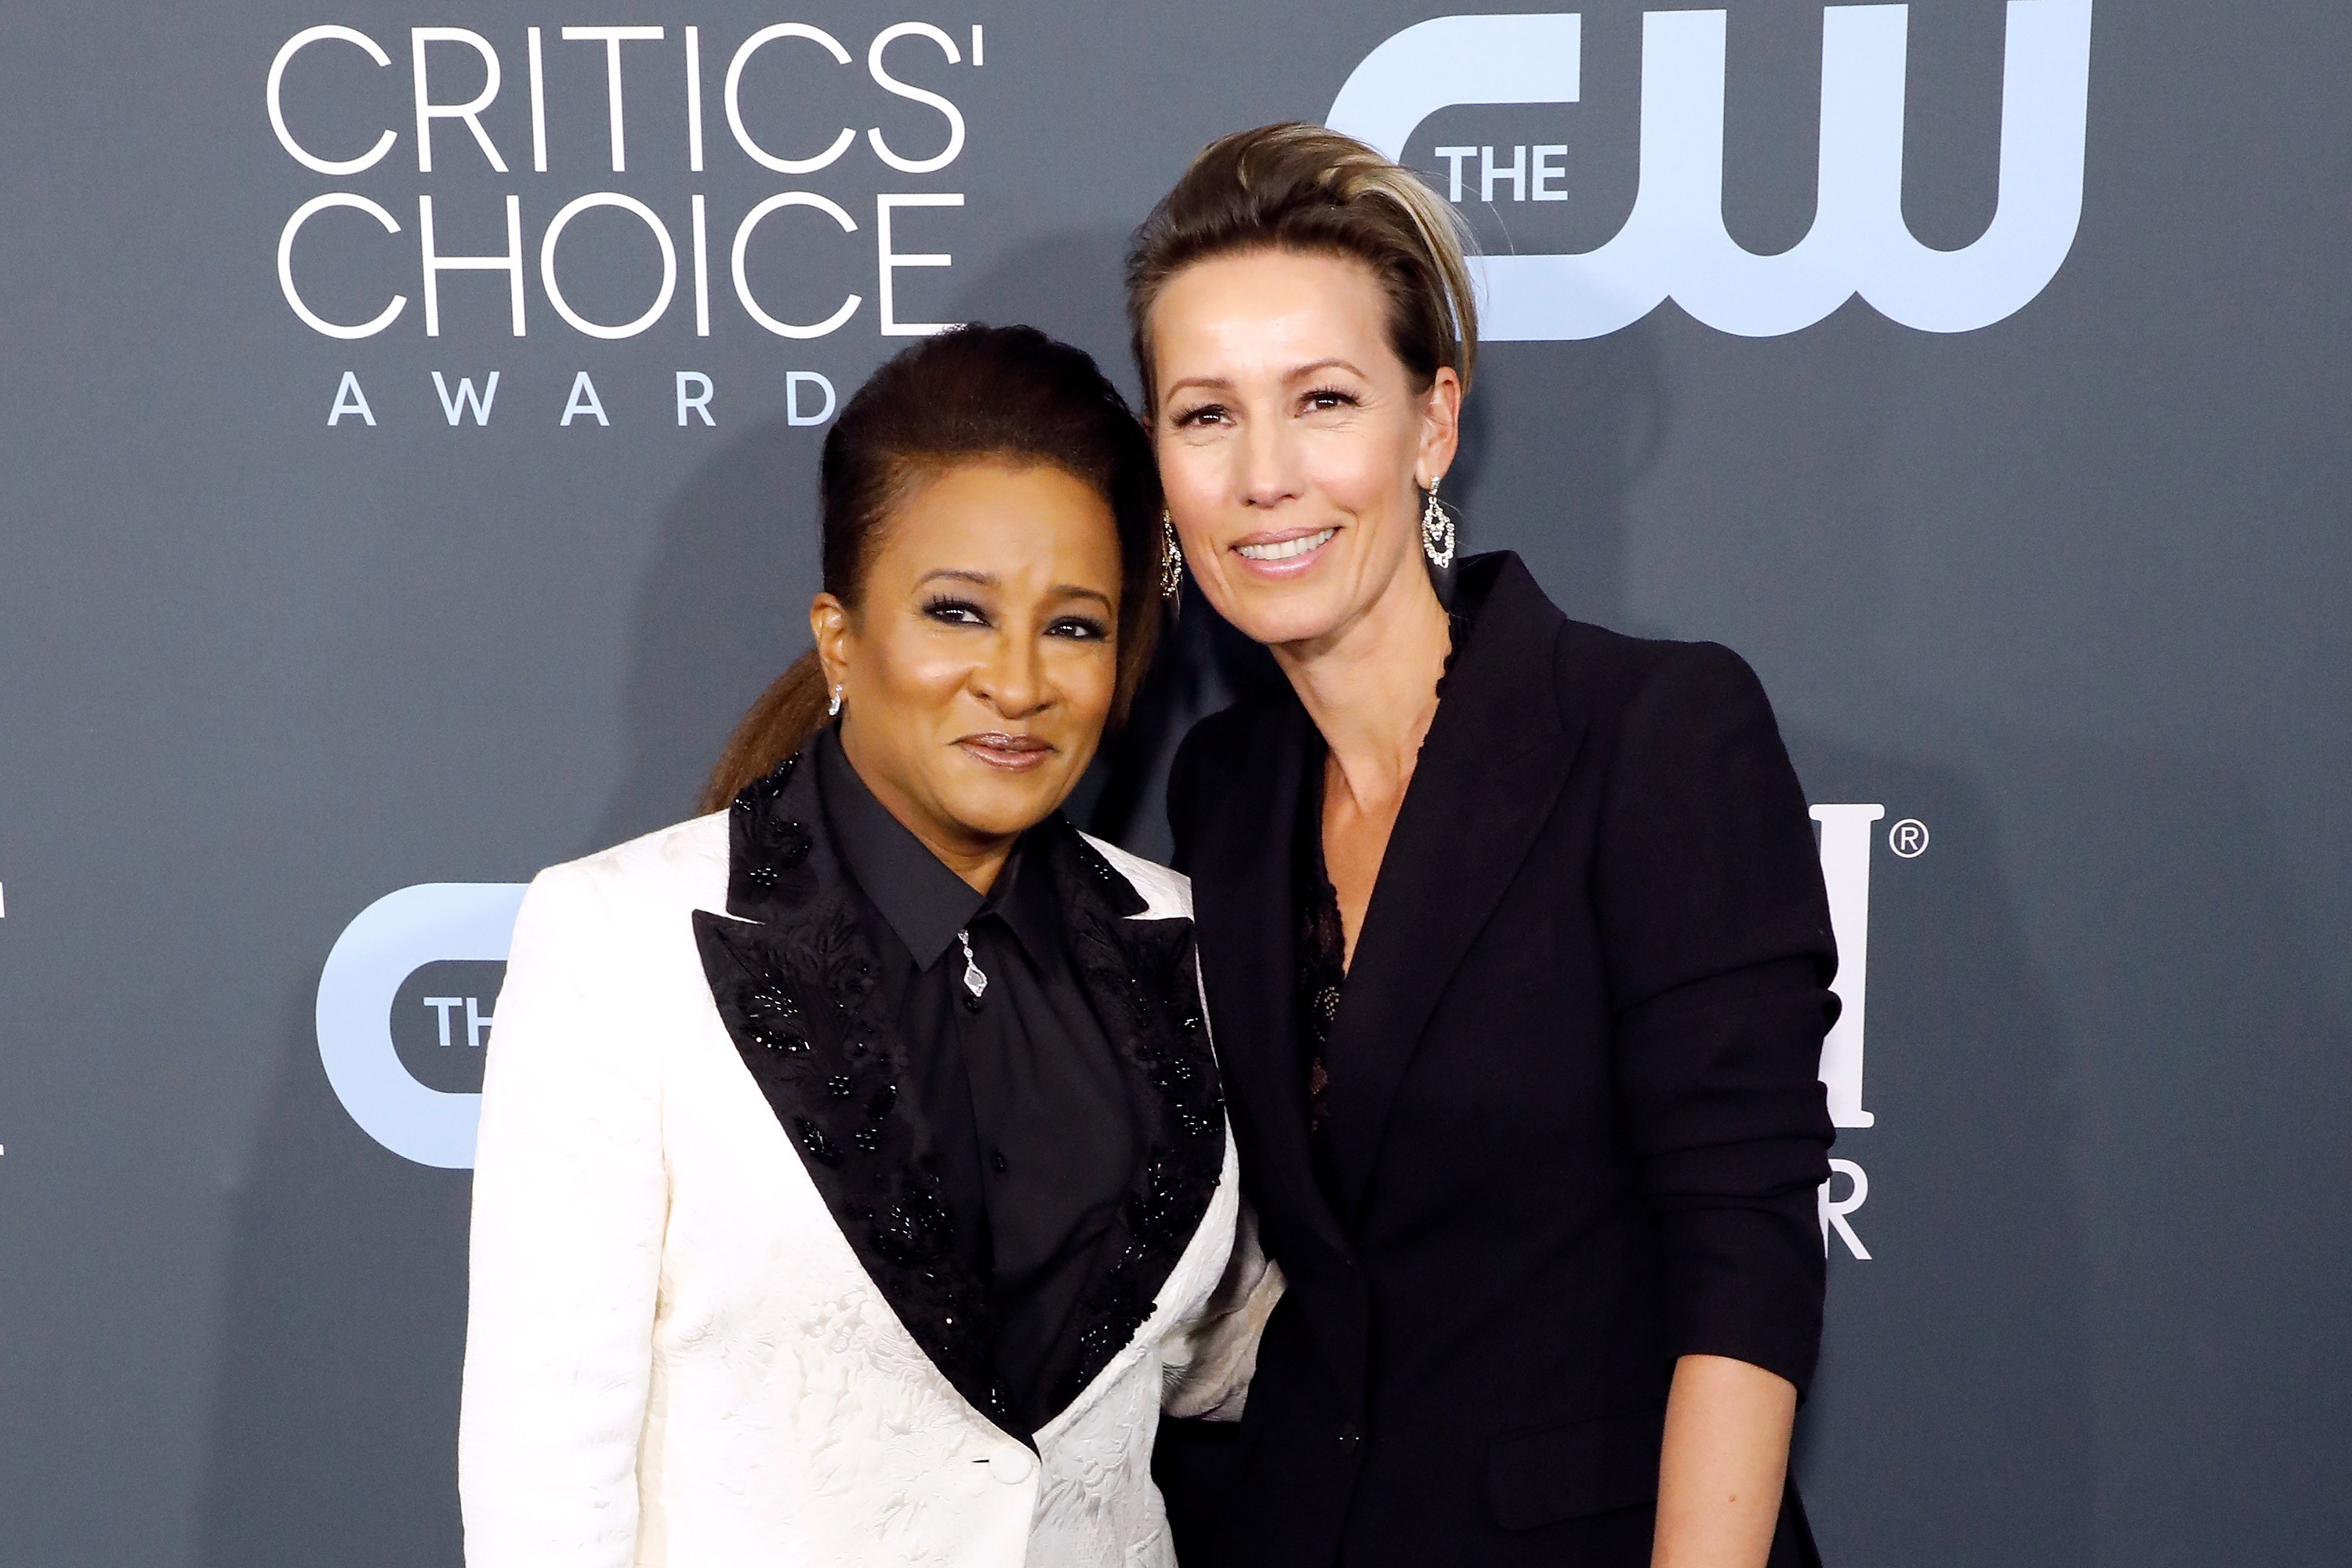 Wanda Sykes and her partner, Alex Sykes, pose for a photo together at the Critics' Choice Awards